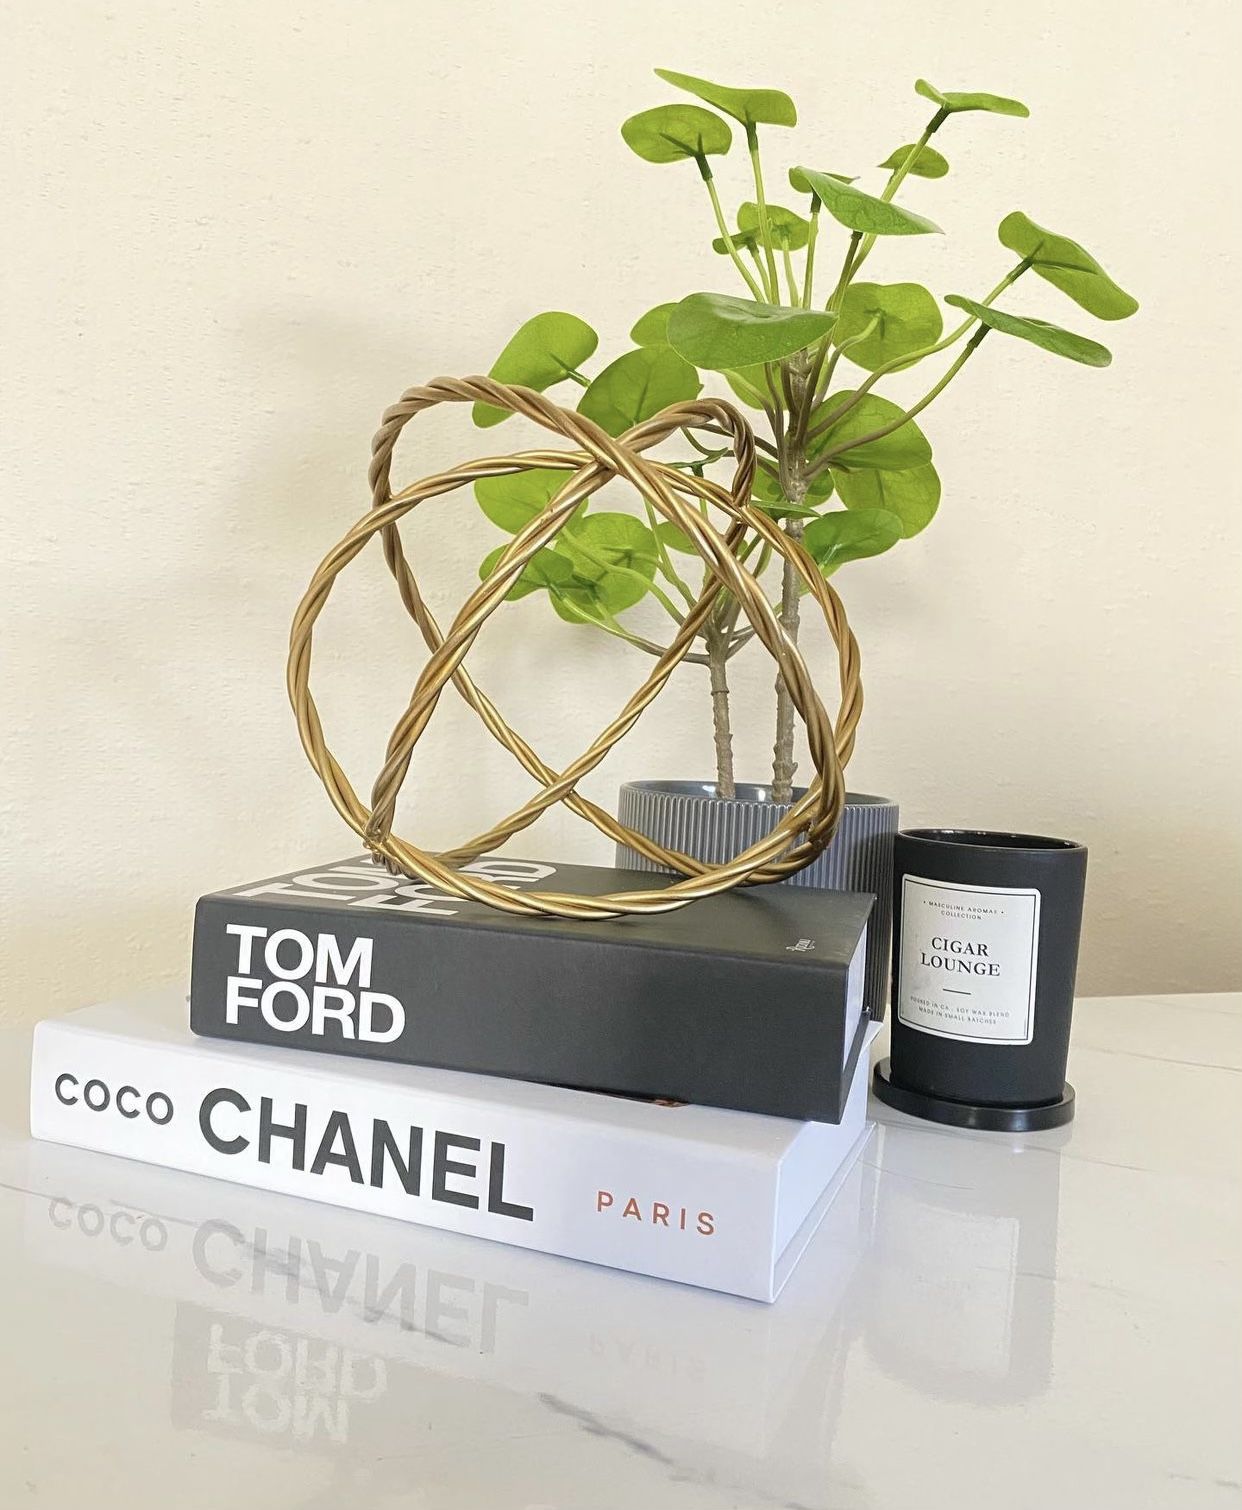 CHANEL INSPIRED BOOK MADE WITH DOLLAR TREE BOOKS